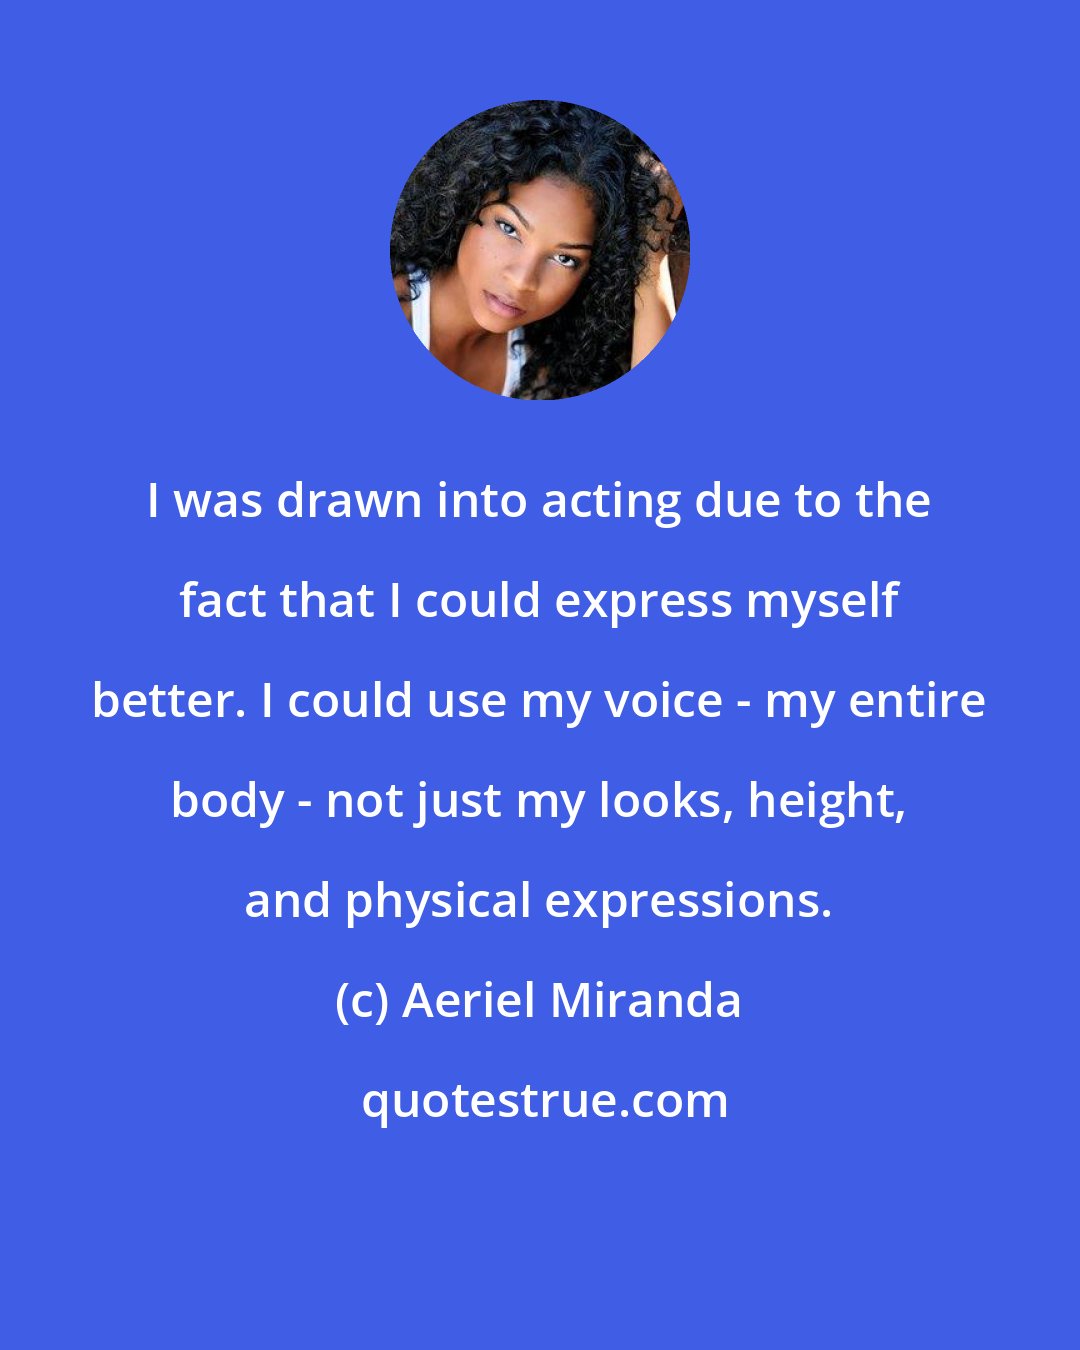 Aeriel Miranda: I was drawn into acting due to the fact that I could express myself better. I could use my voice - my entire body - not just my looks, height, and physical expressions.